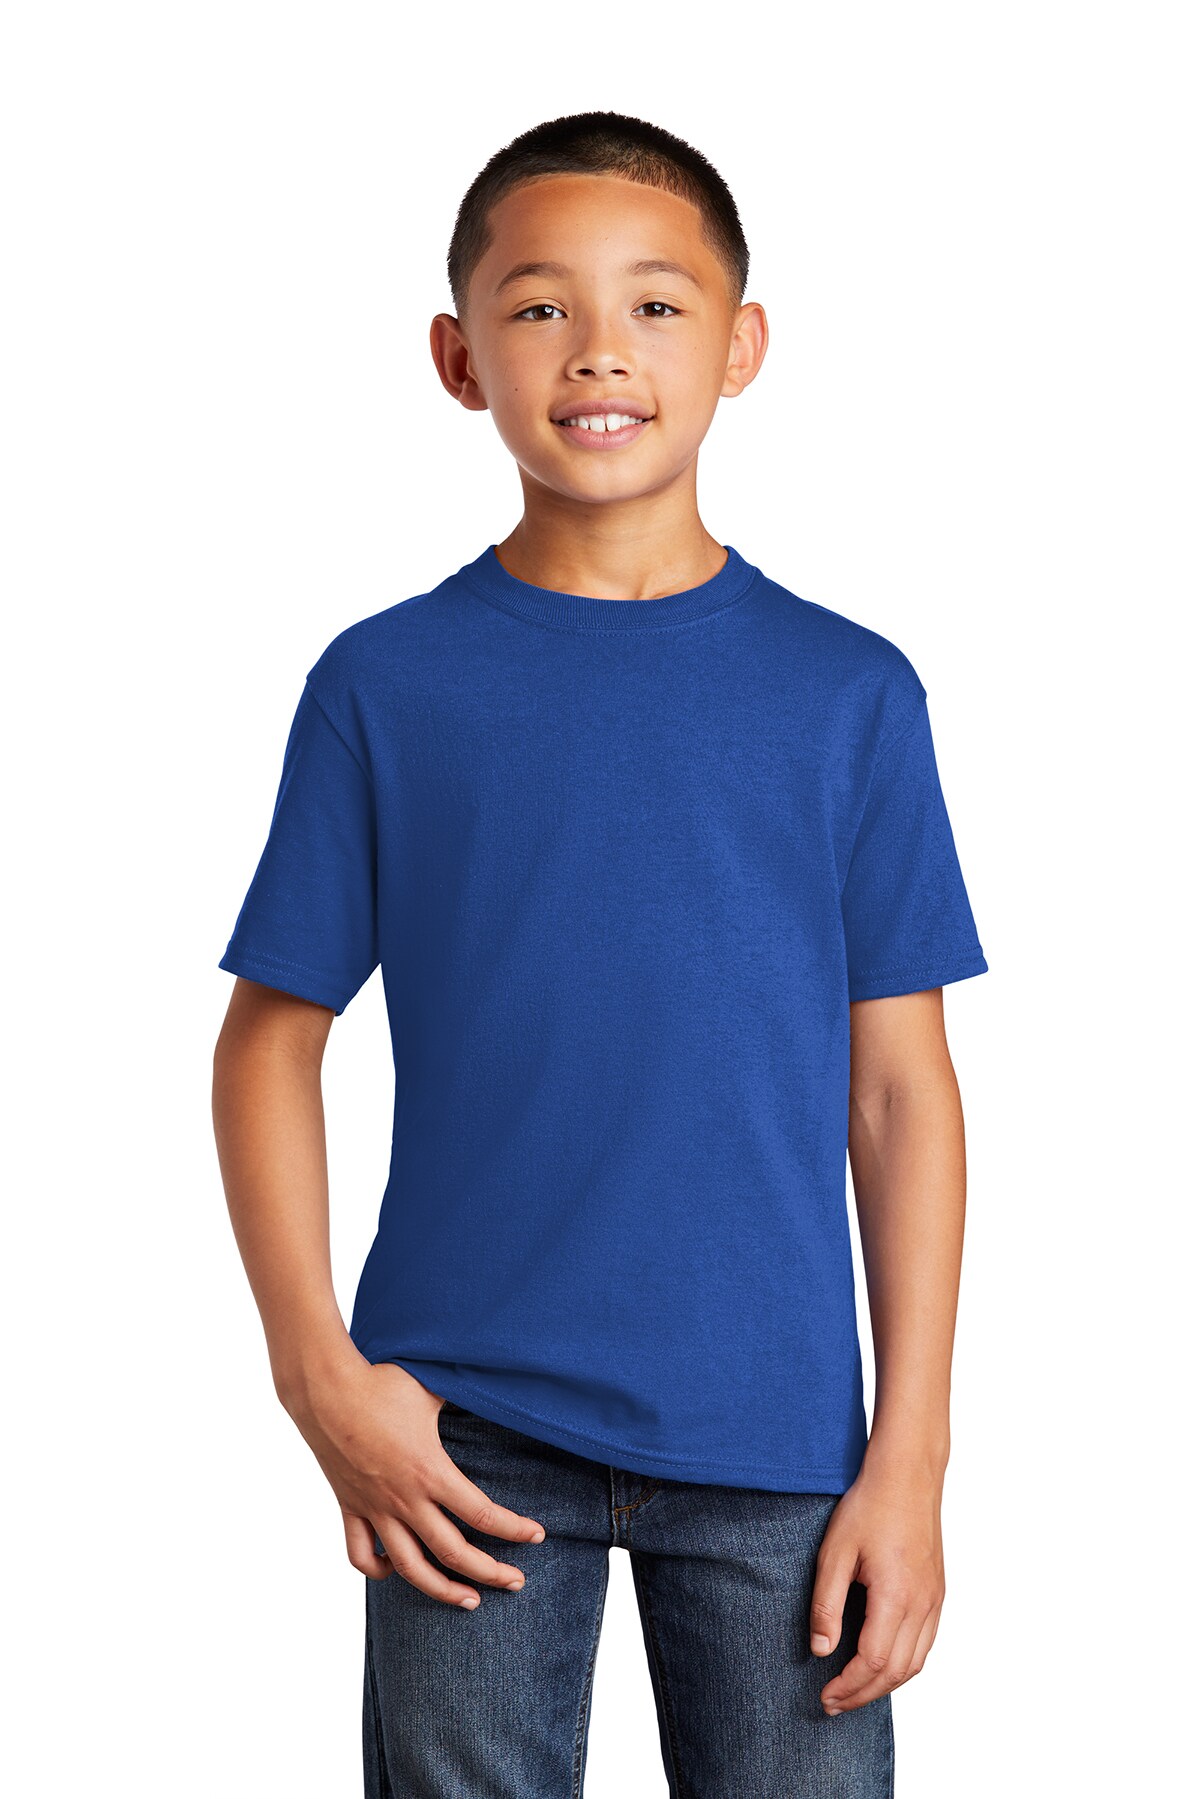 Fashionable Youth Core Cotton Tee, 5.4-OZ, 100% cotton, Classic Soft  Blend T-shirt, Best gift for kids, RADYAN®